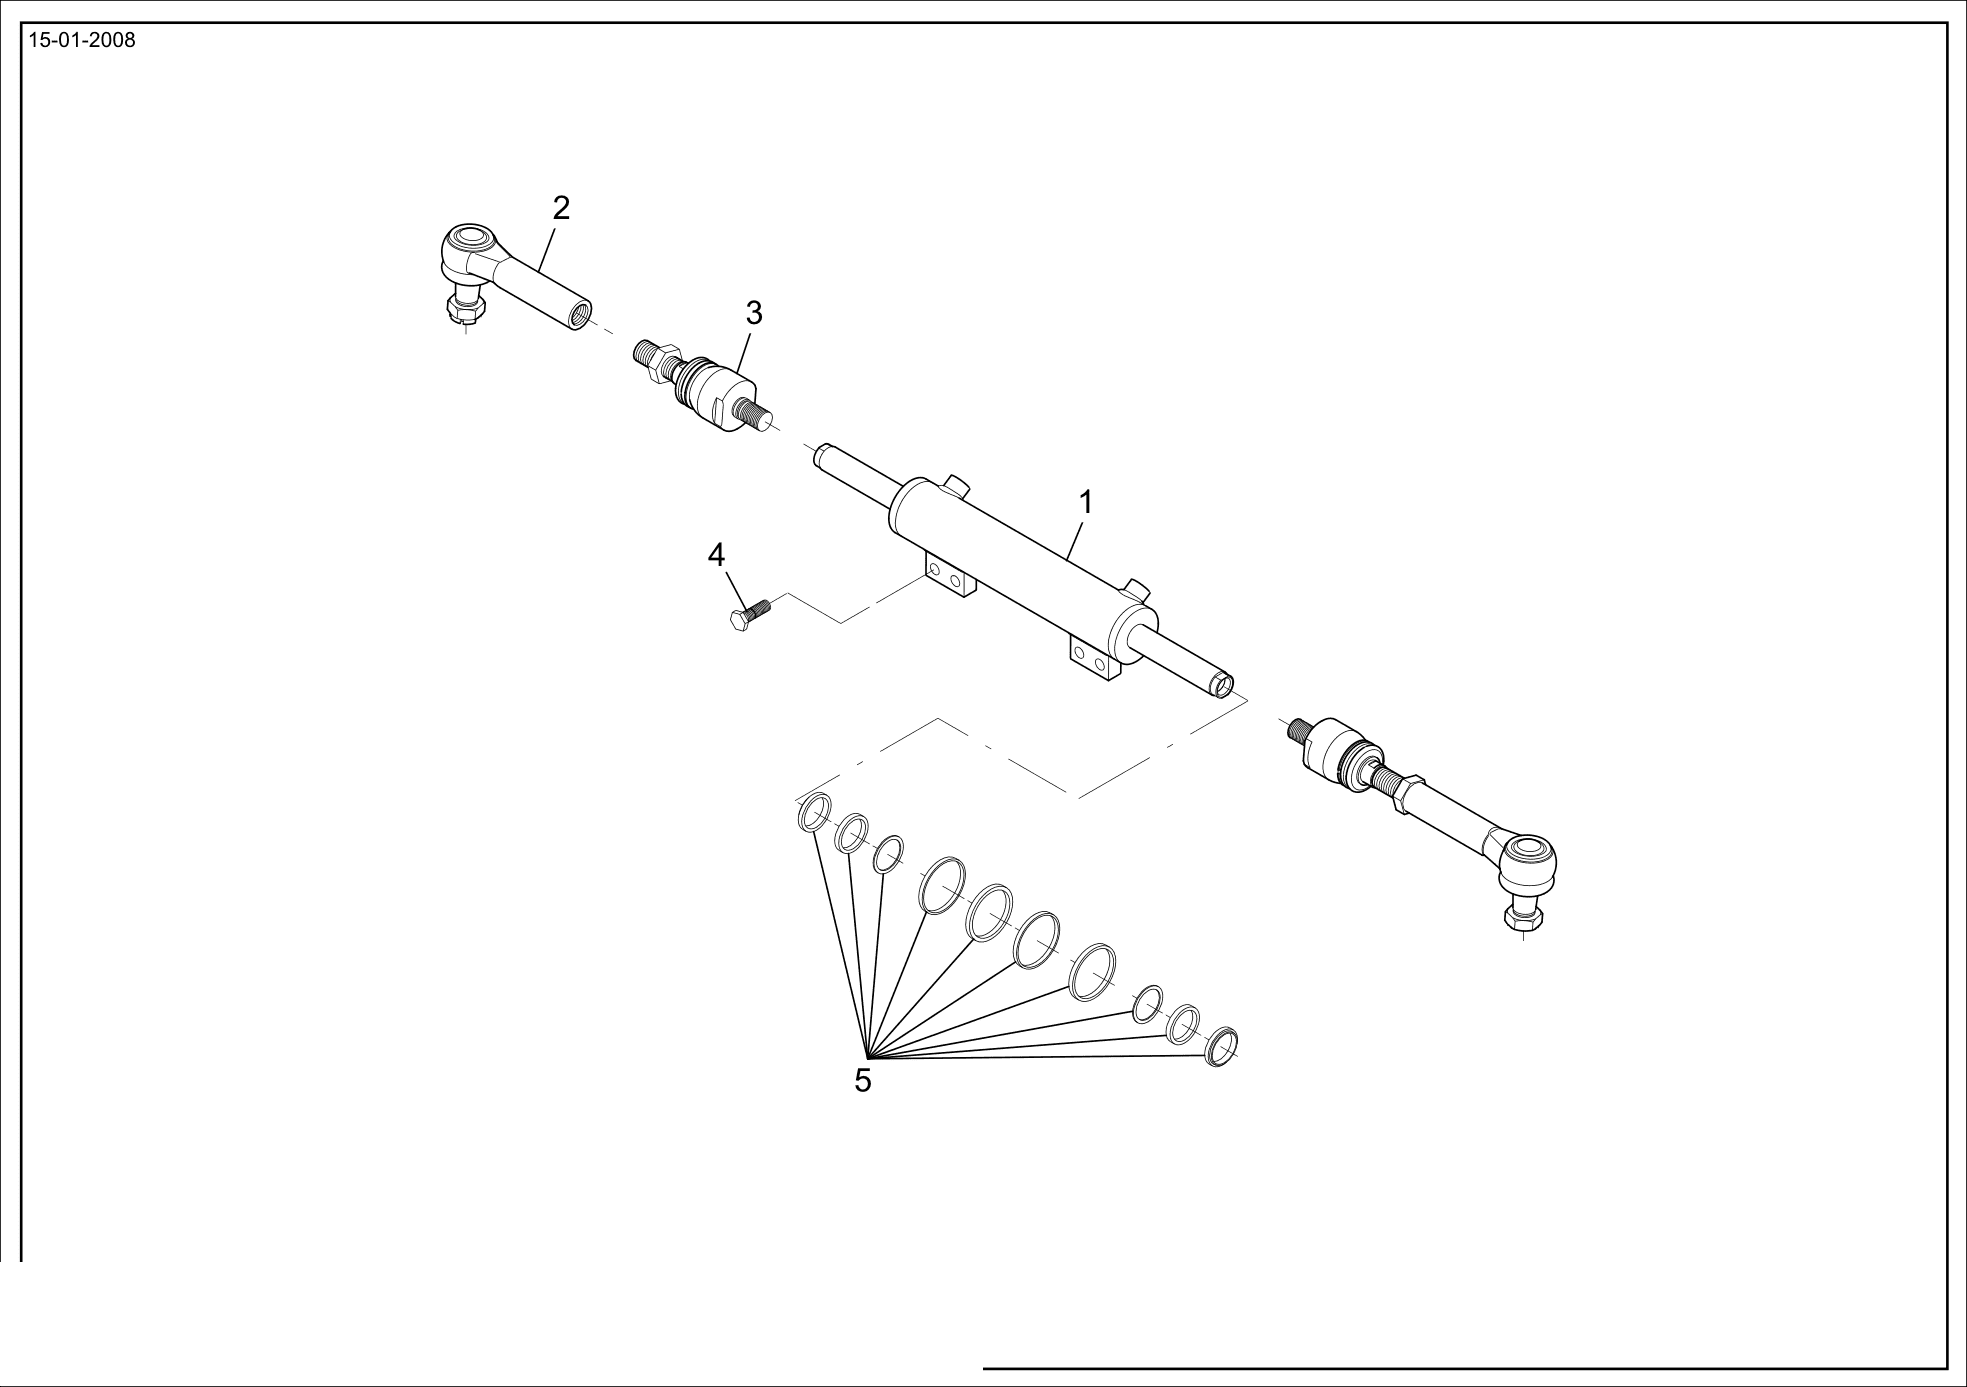 drawing for McCORMICK 1440356X1 - BOLT (figure 1)